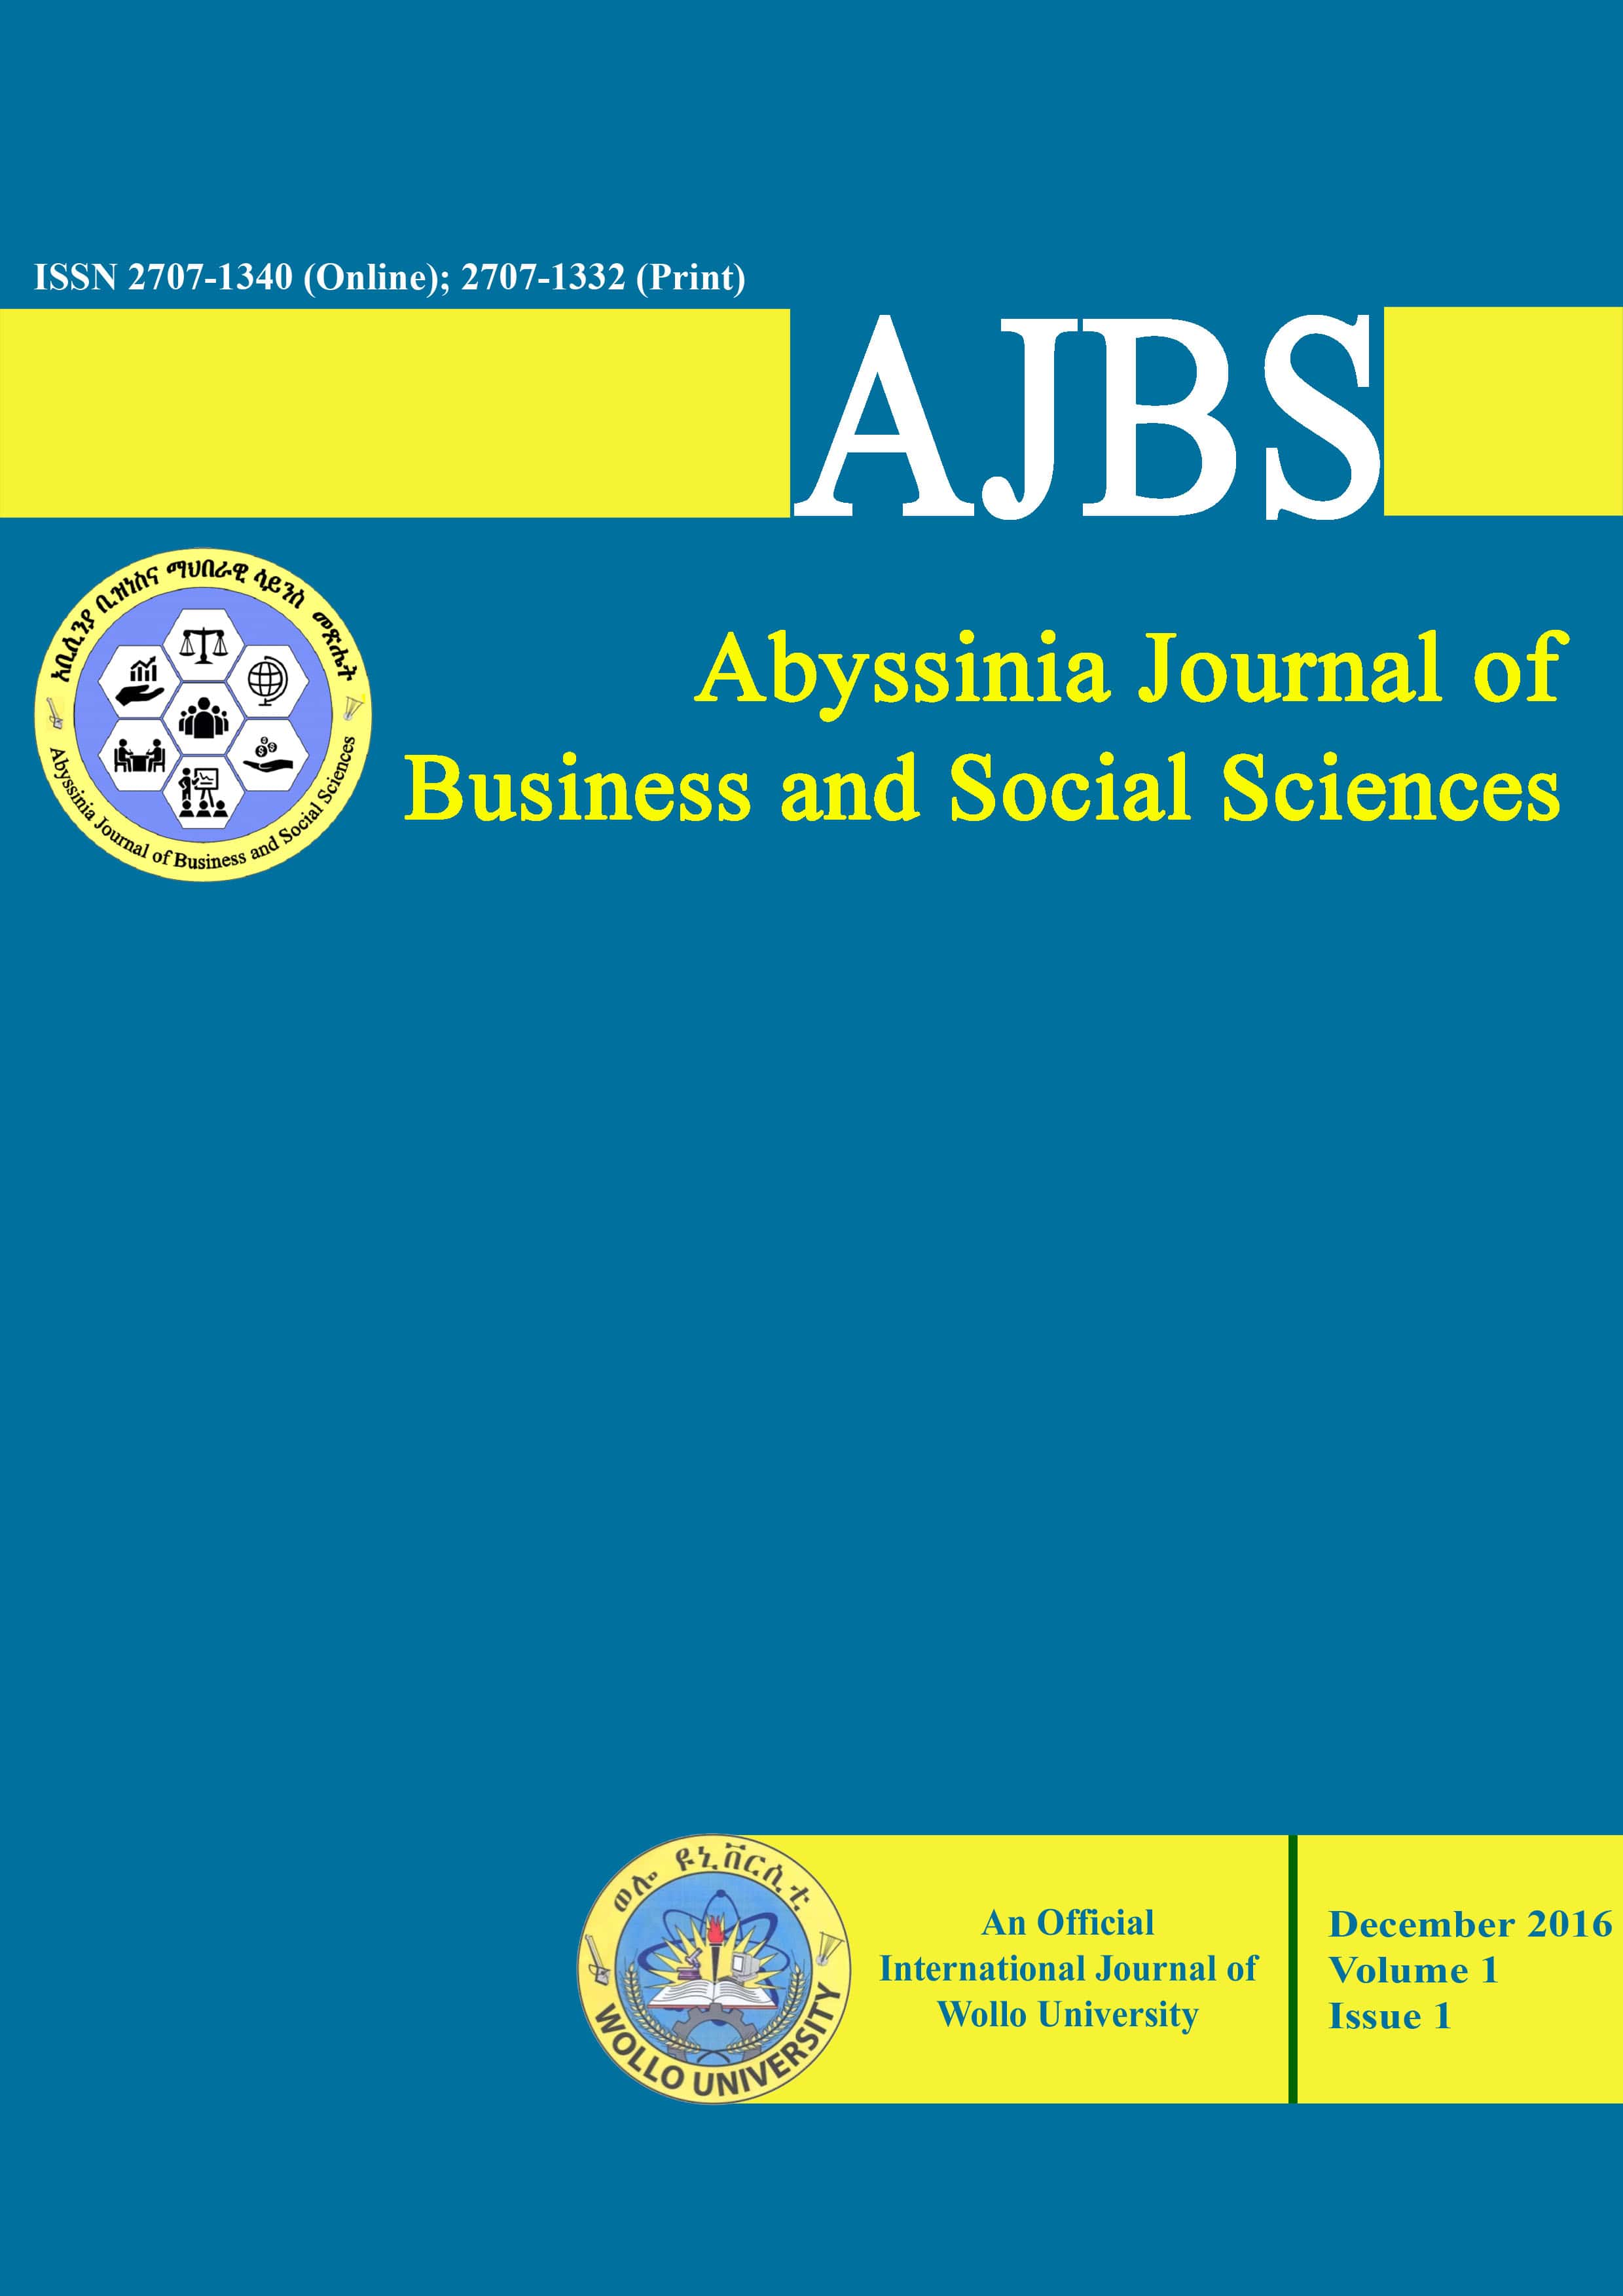 Abyssinia Journal of Business and Social Science (AJBS)